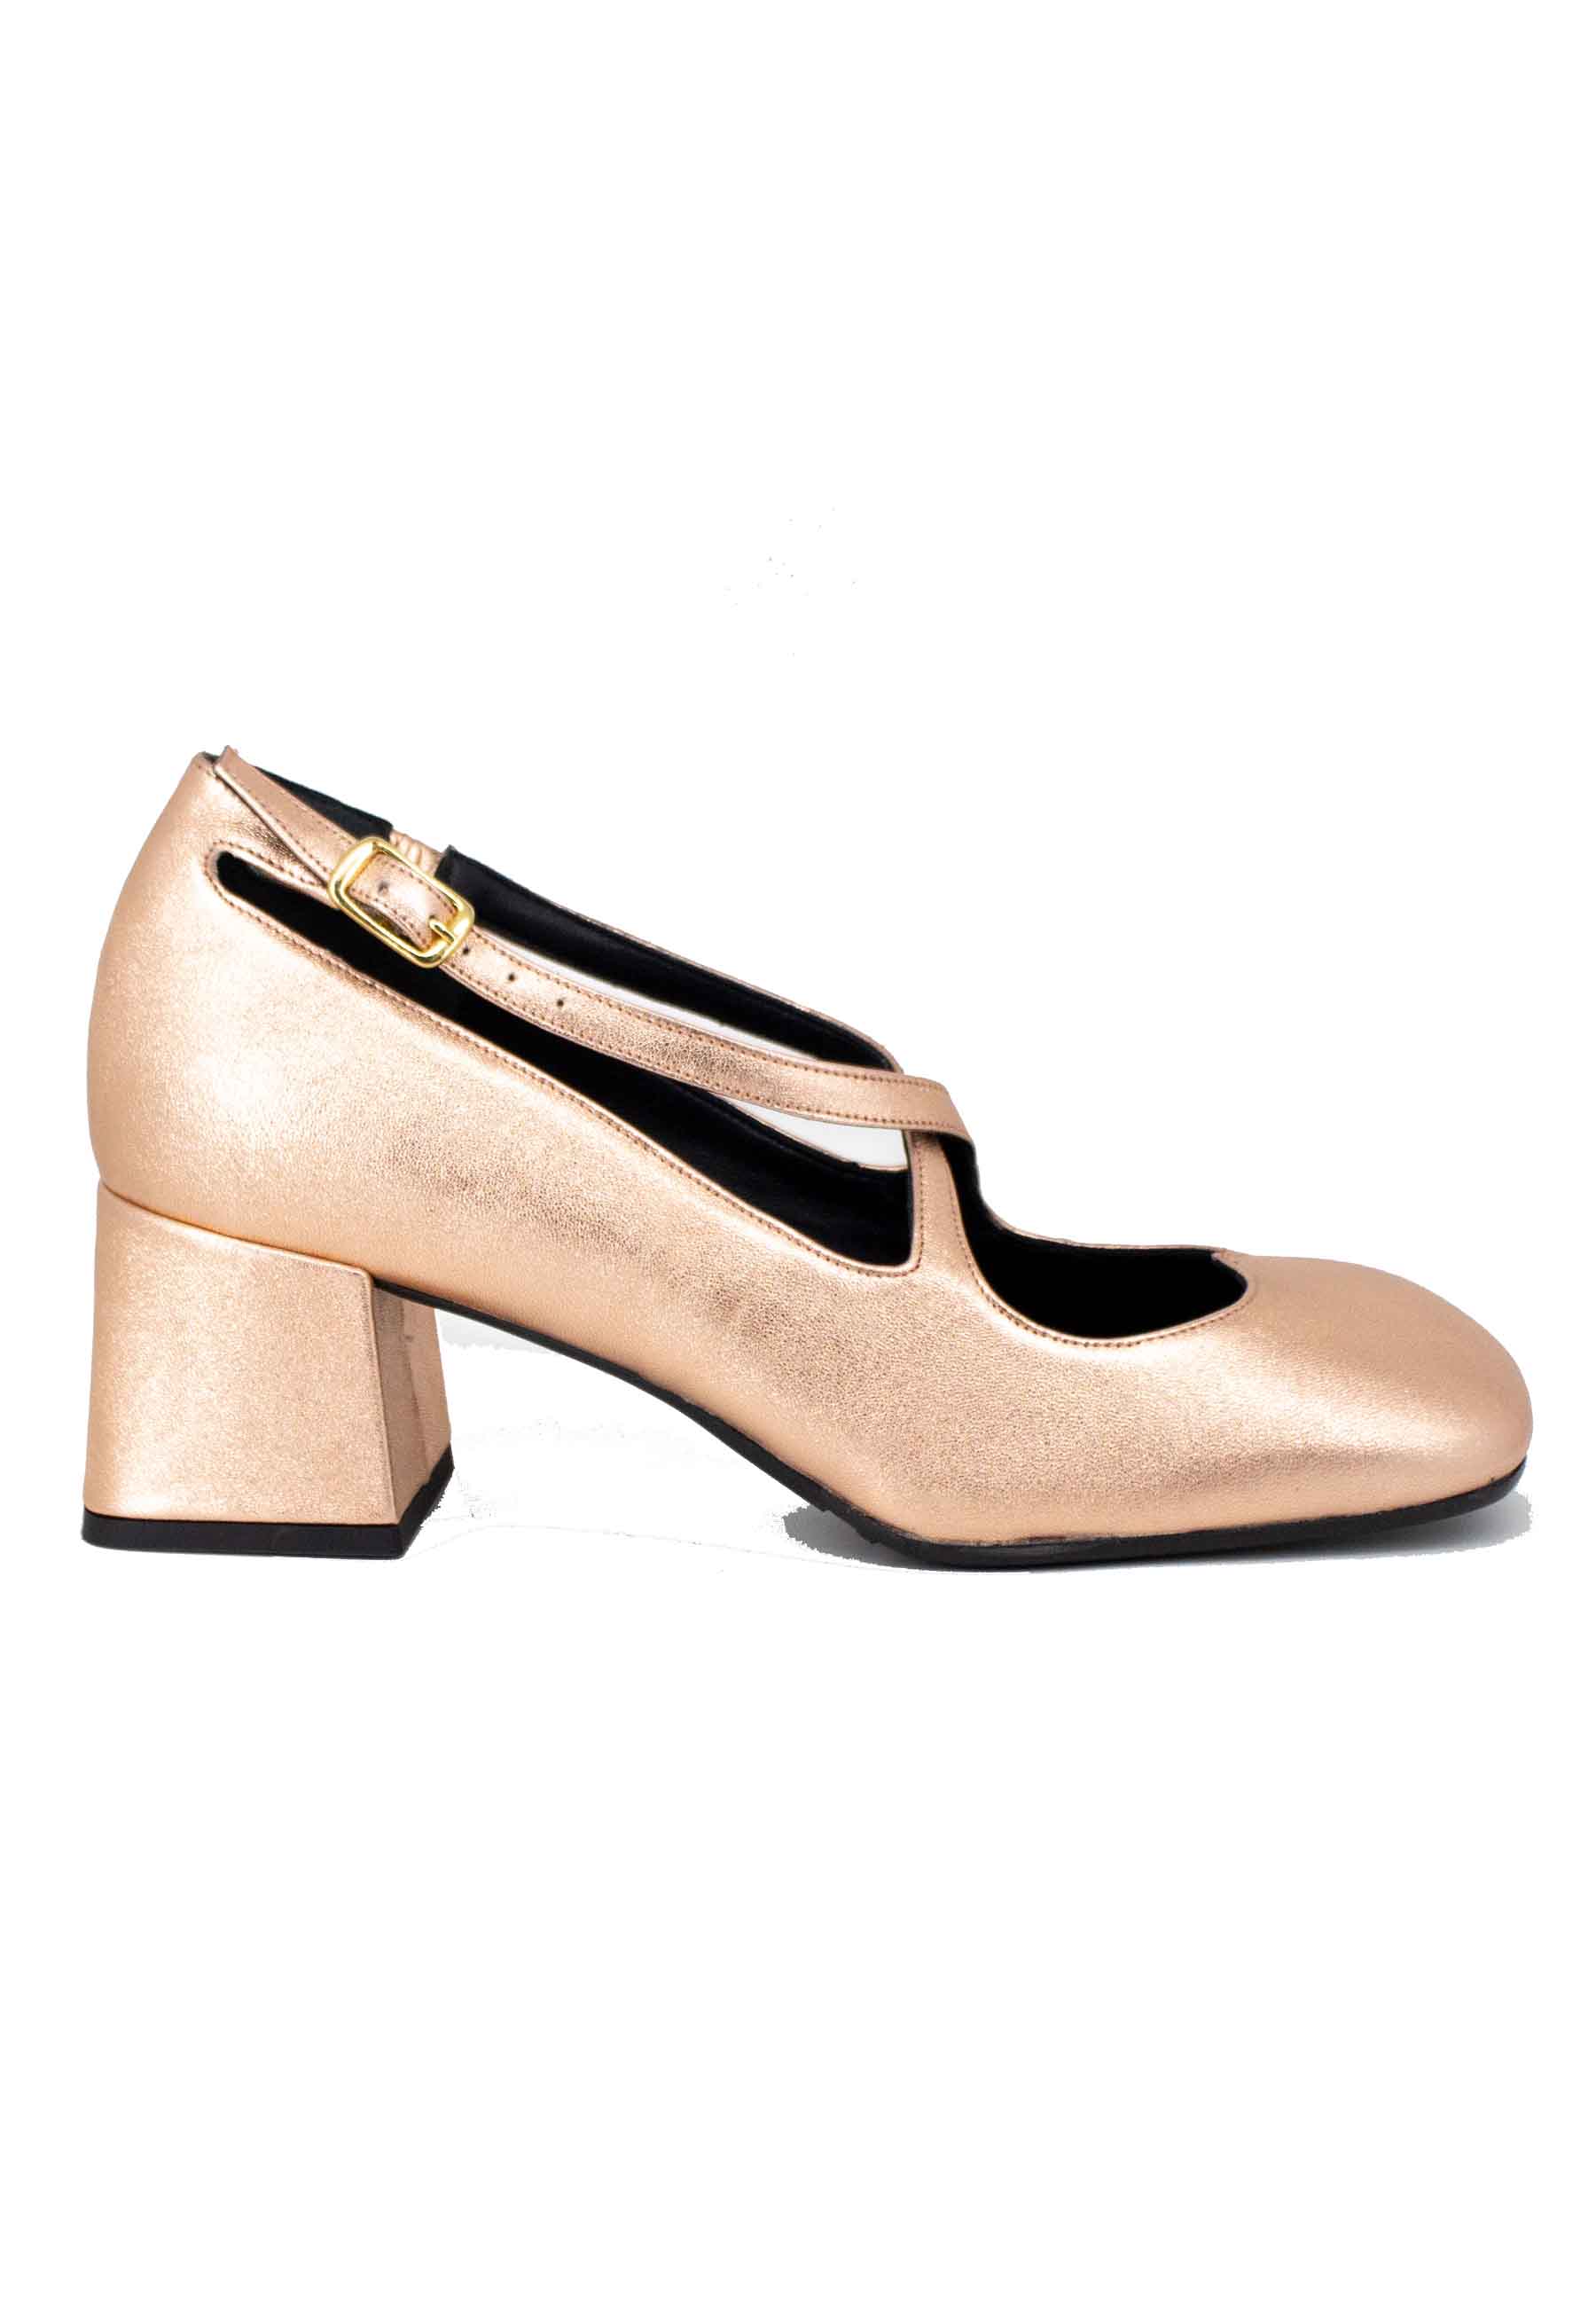 Women's pumps in salmon laminated leather with double strap and square toe